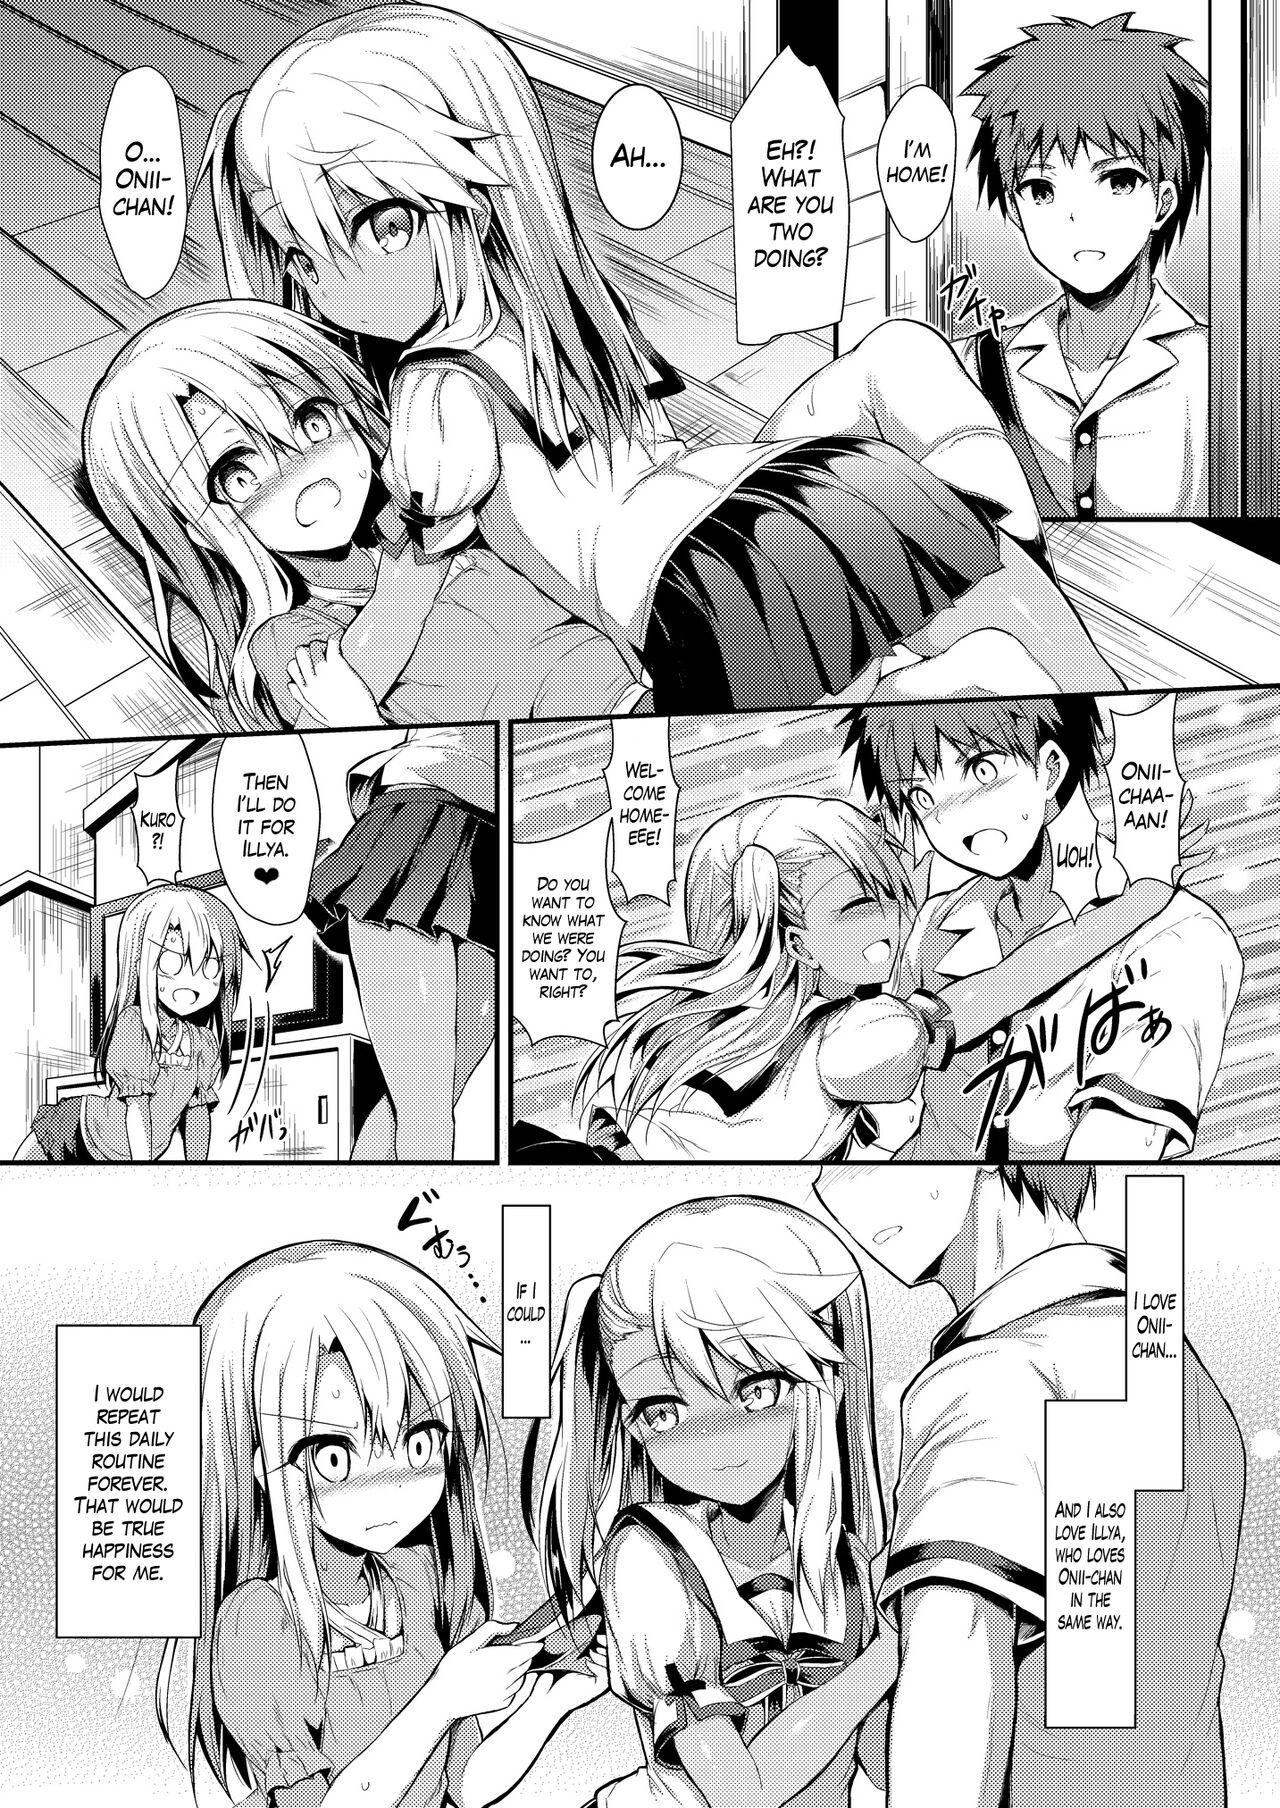 [ASTRONOMY (SeN)] Imouto wa Onii-chan to Shouraiteki ni Flag o Tatetai 3 | The little sister wants to have a flag set so she gets Onii-chan in the future 3 (Fate/kaleid liner Prisma Illya) [English] [The Blavatsky project] [Digital] 14